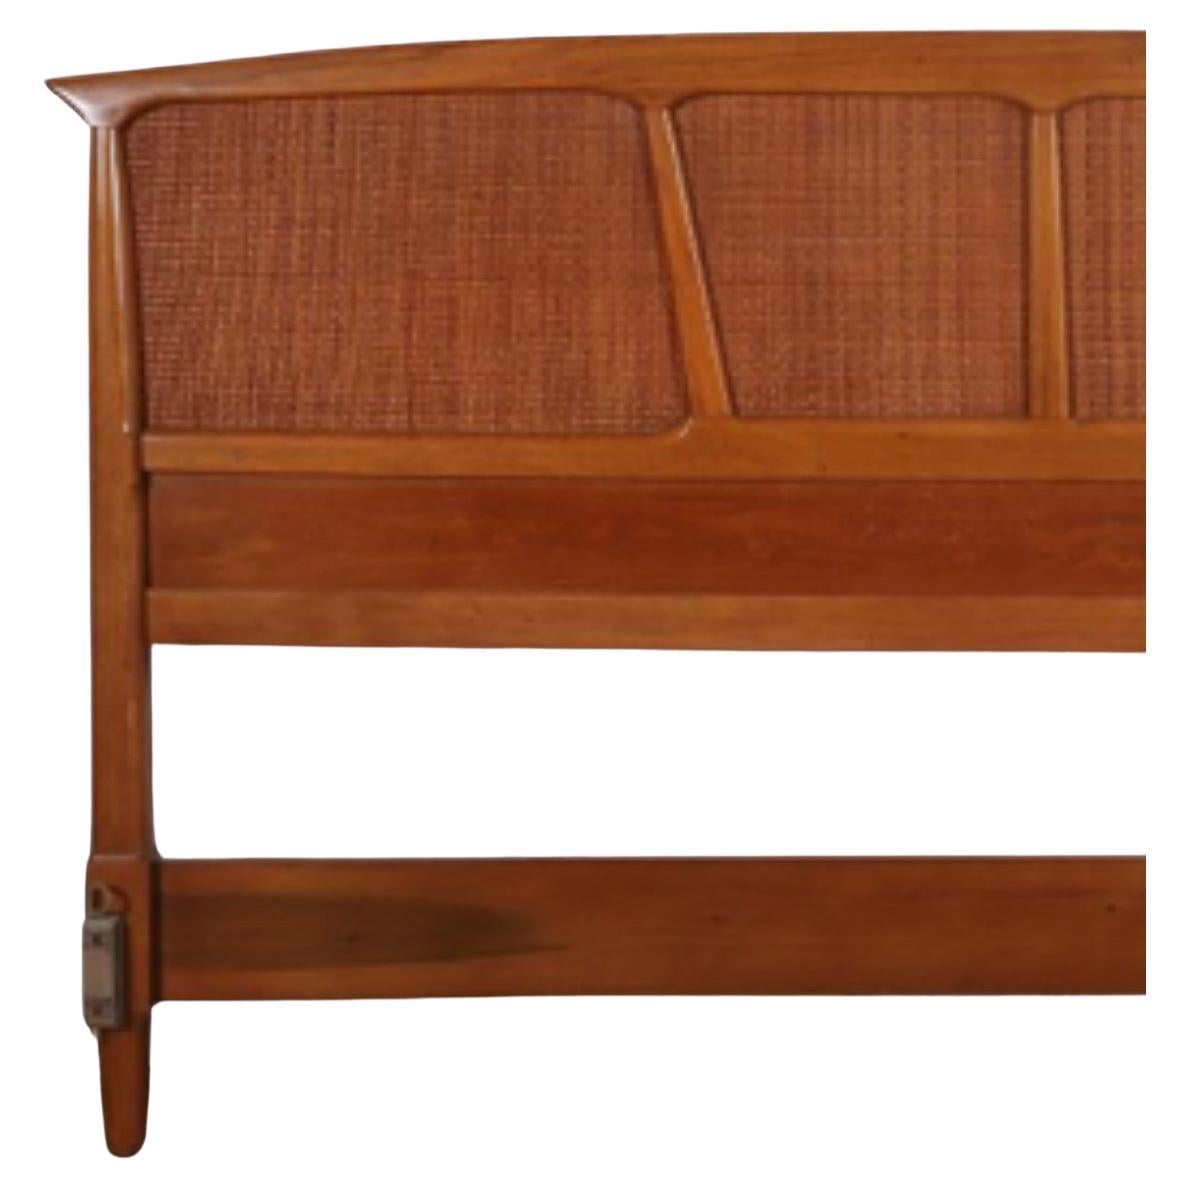 Beautiful walnut sculpted cane King size bed headboard. Arched top with sculpted walnut structure with caning through out. Very stunning King size headboard. Made by Tomlinson. Made in USA. Located in Brooklyn NYC. 

Headboard only no bed frame or